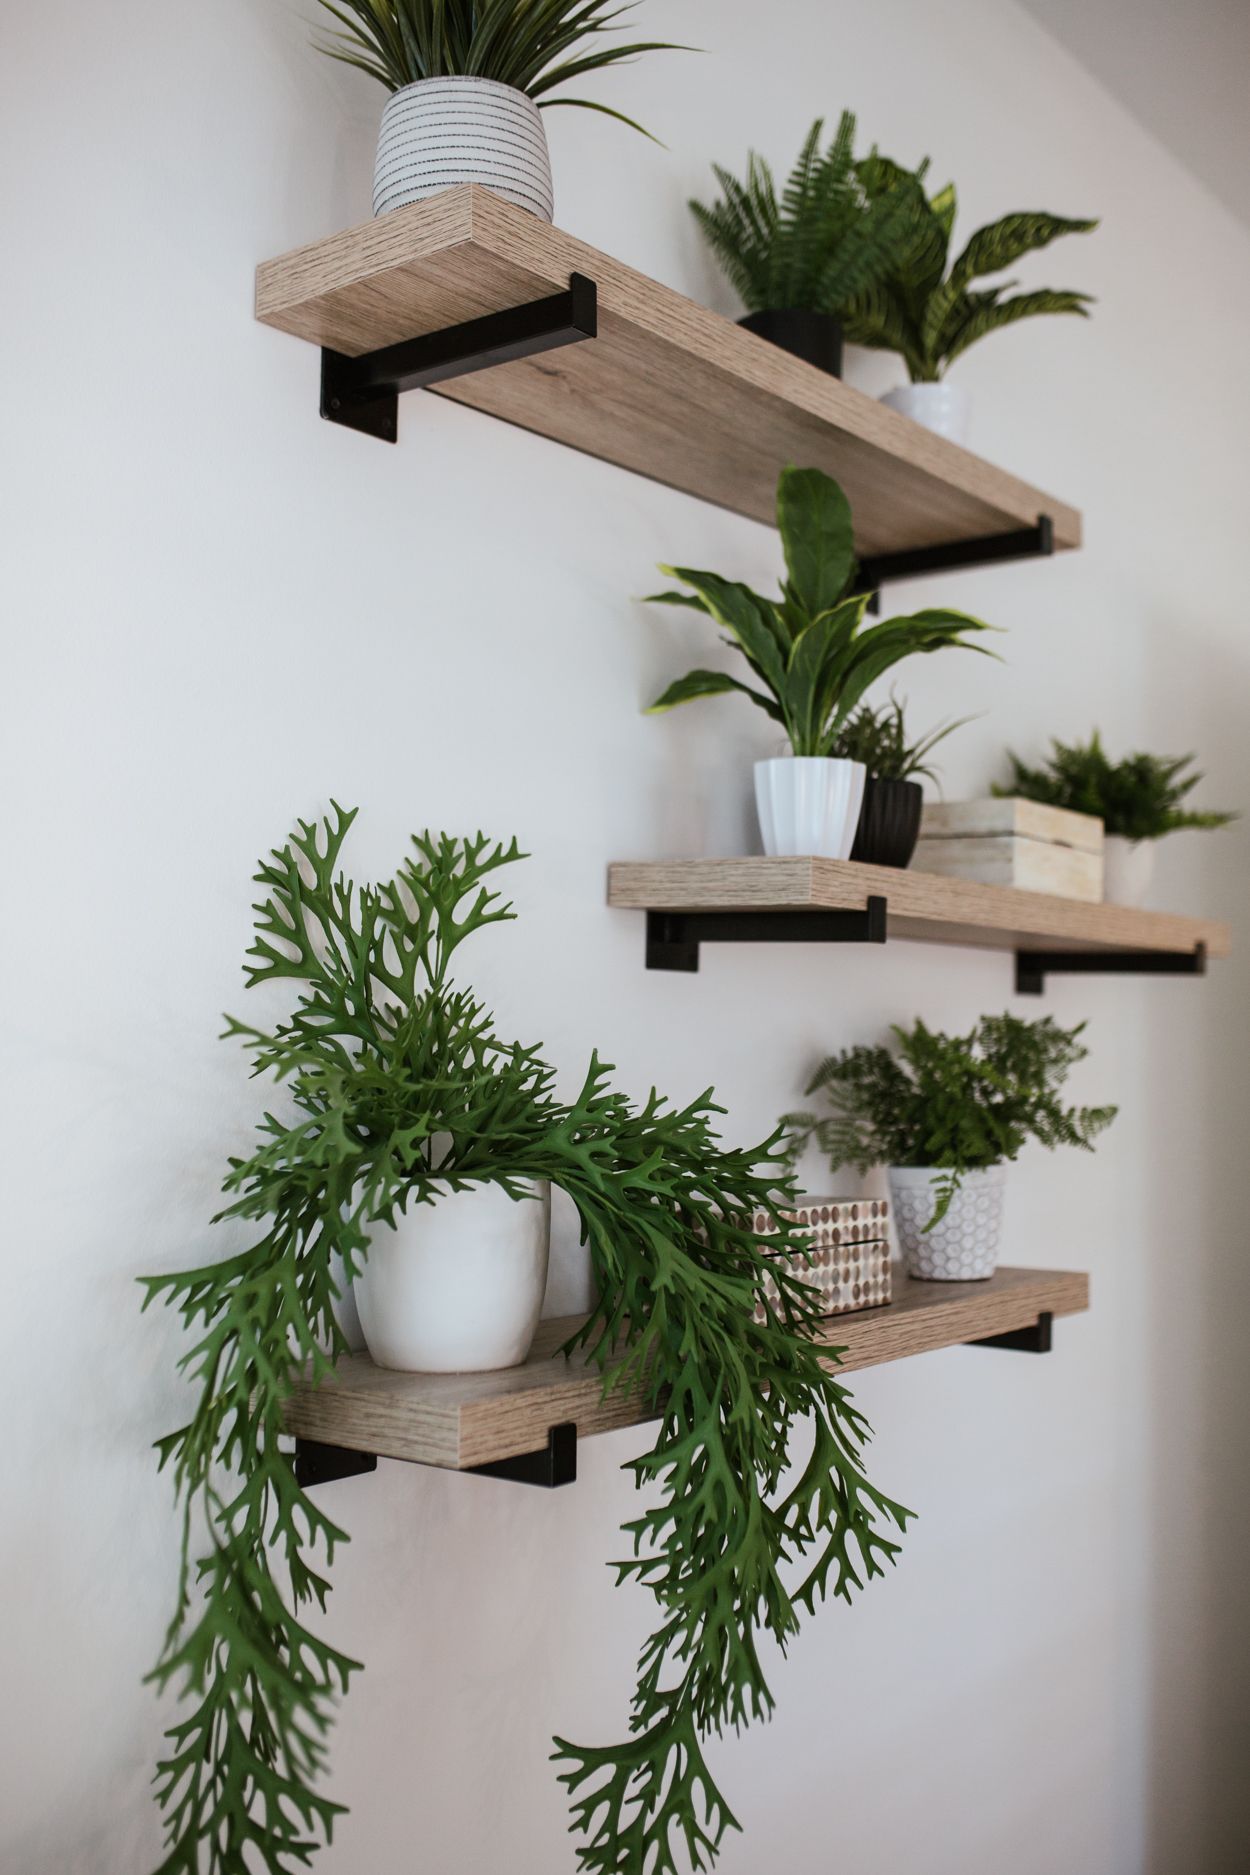 Enhance your house with some amazing and
  decorative wall shelves